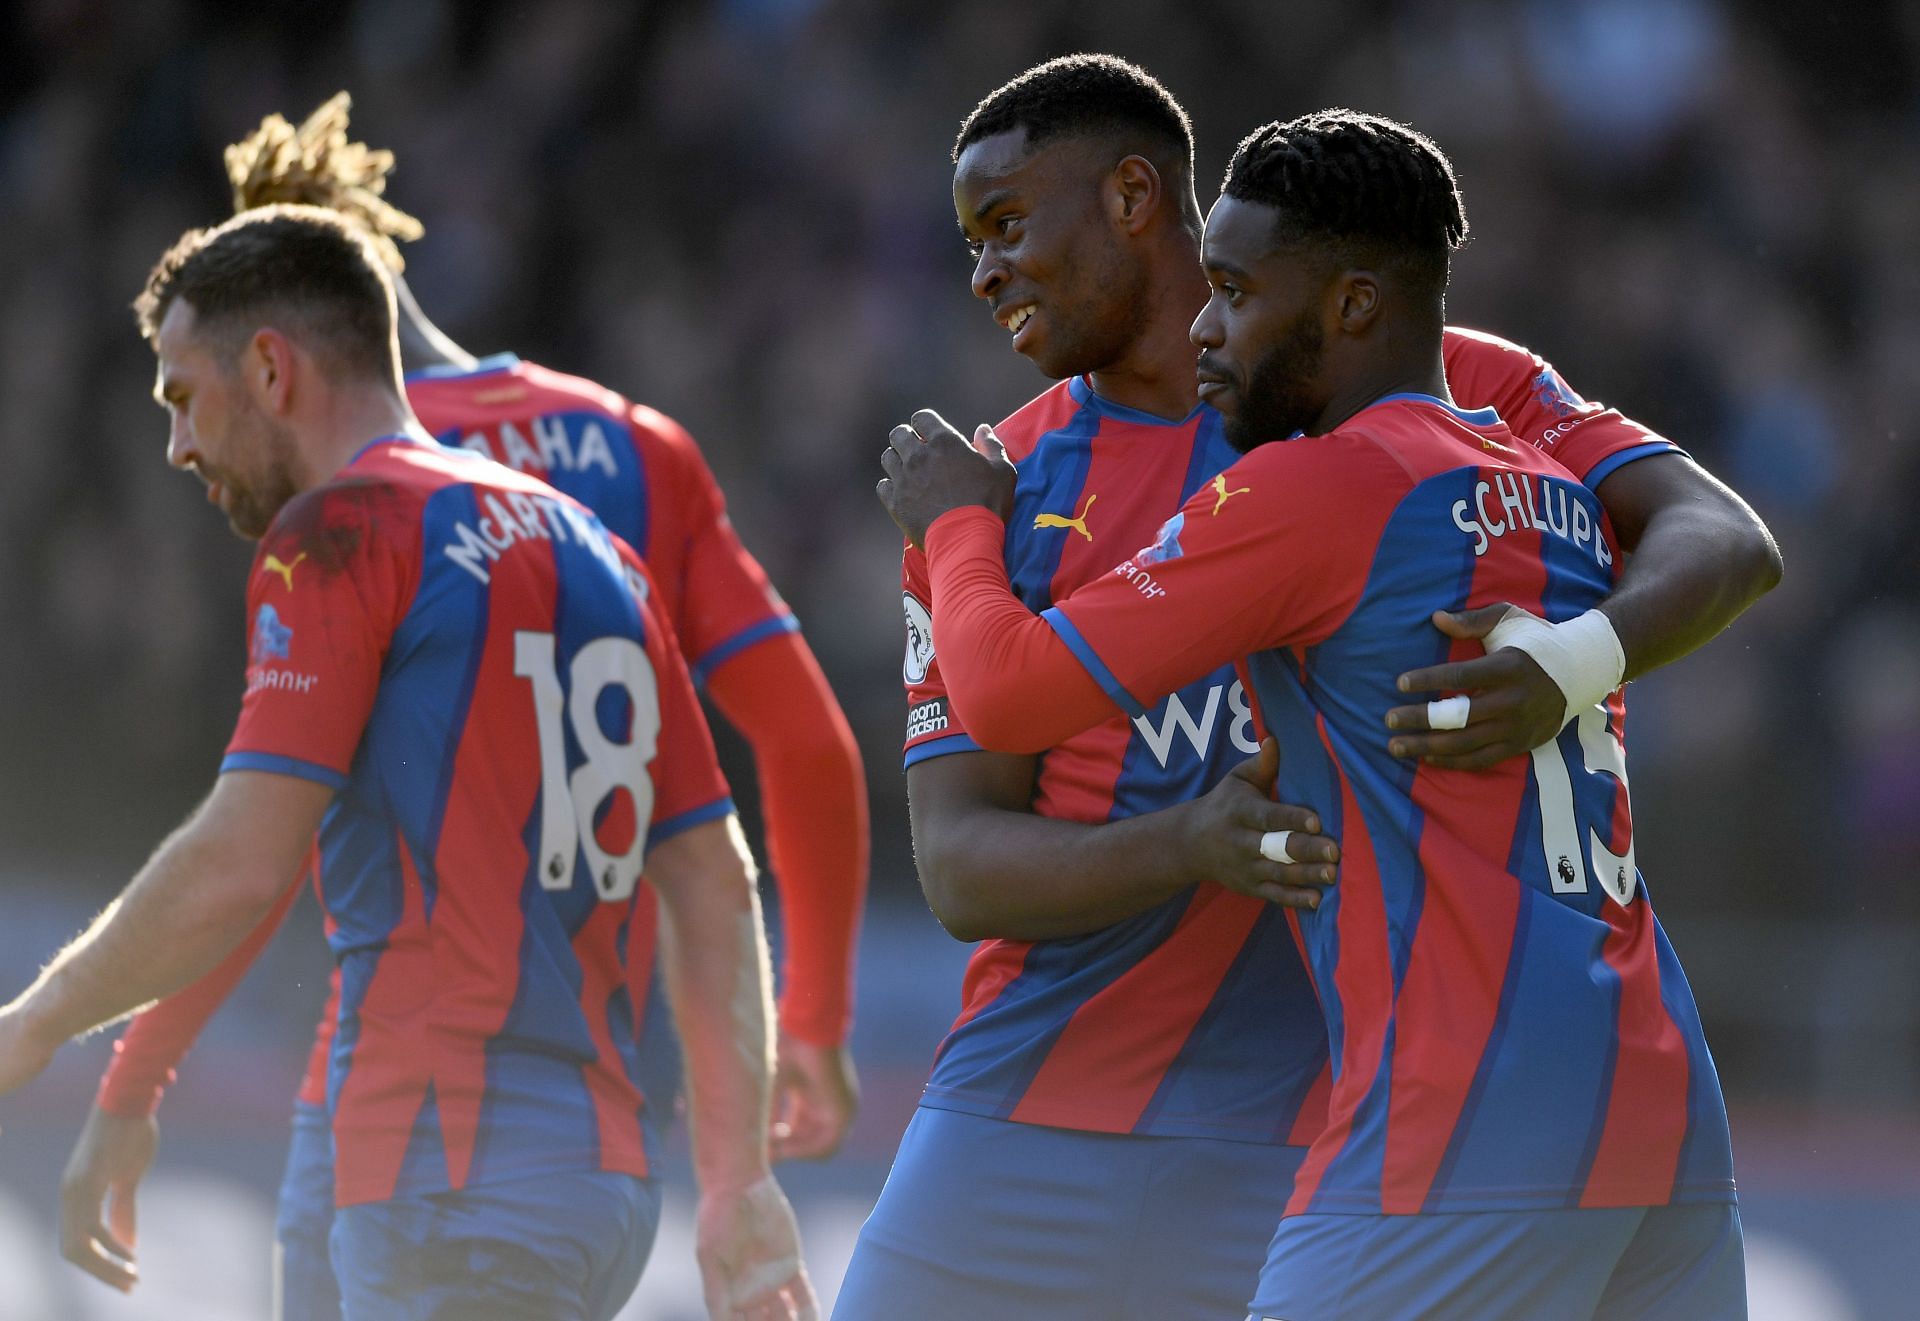 Crystal Palace host Stoke City in their FA Cup fixture on Tuesday night